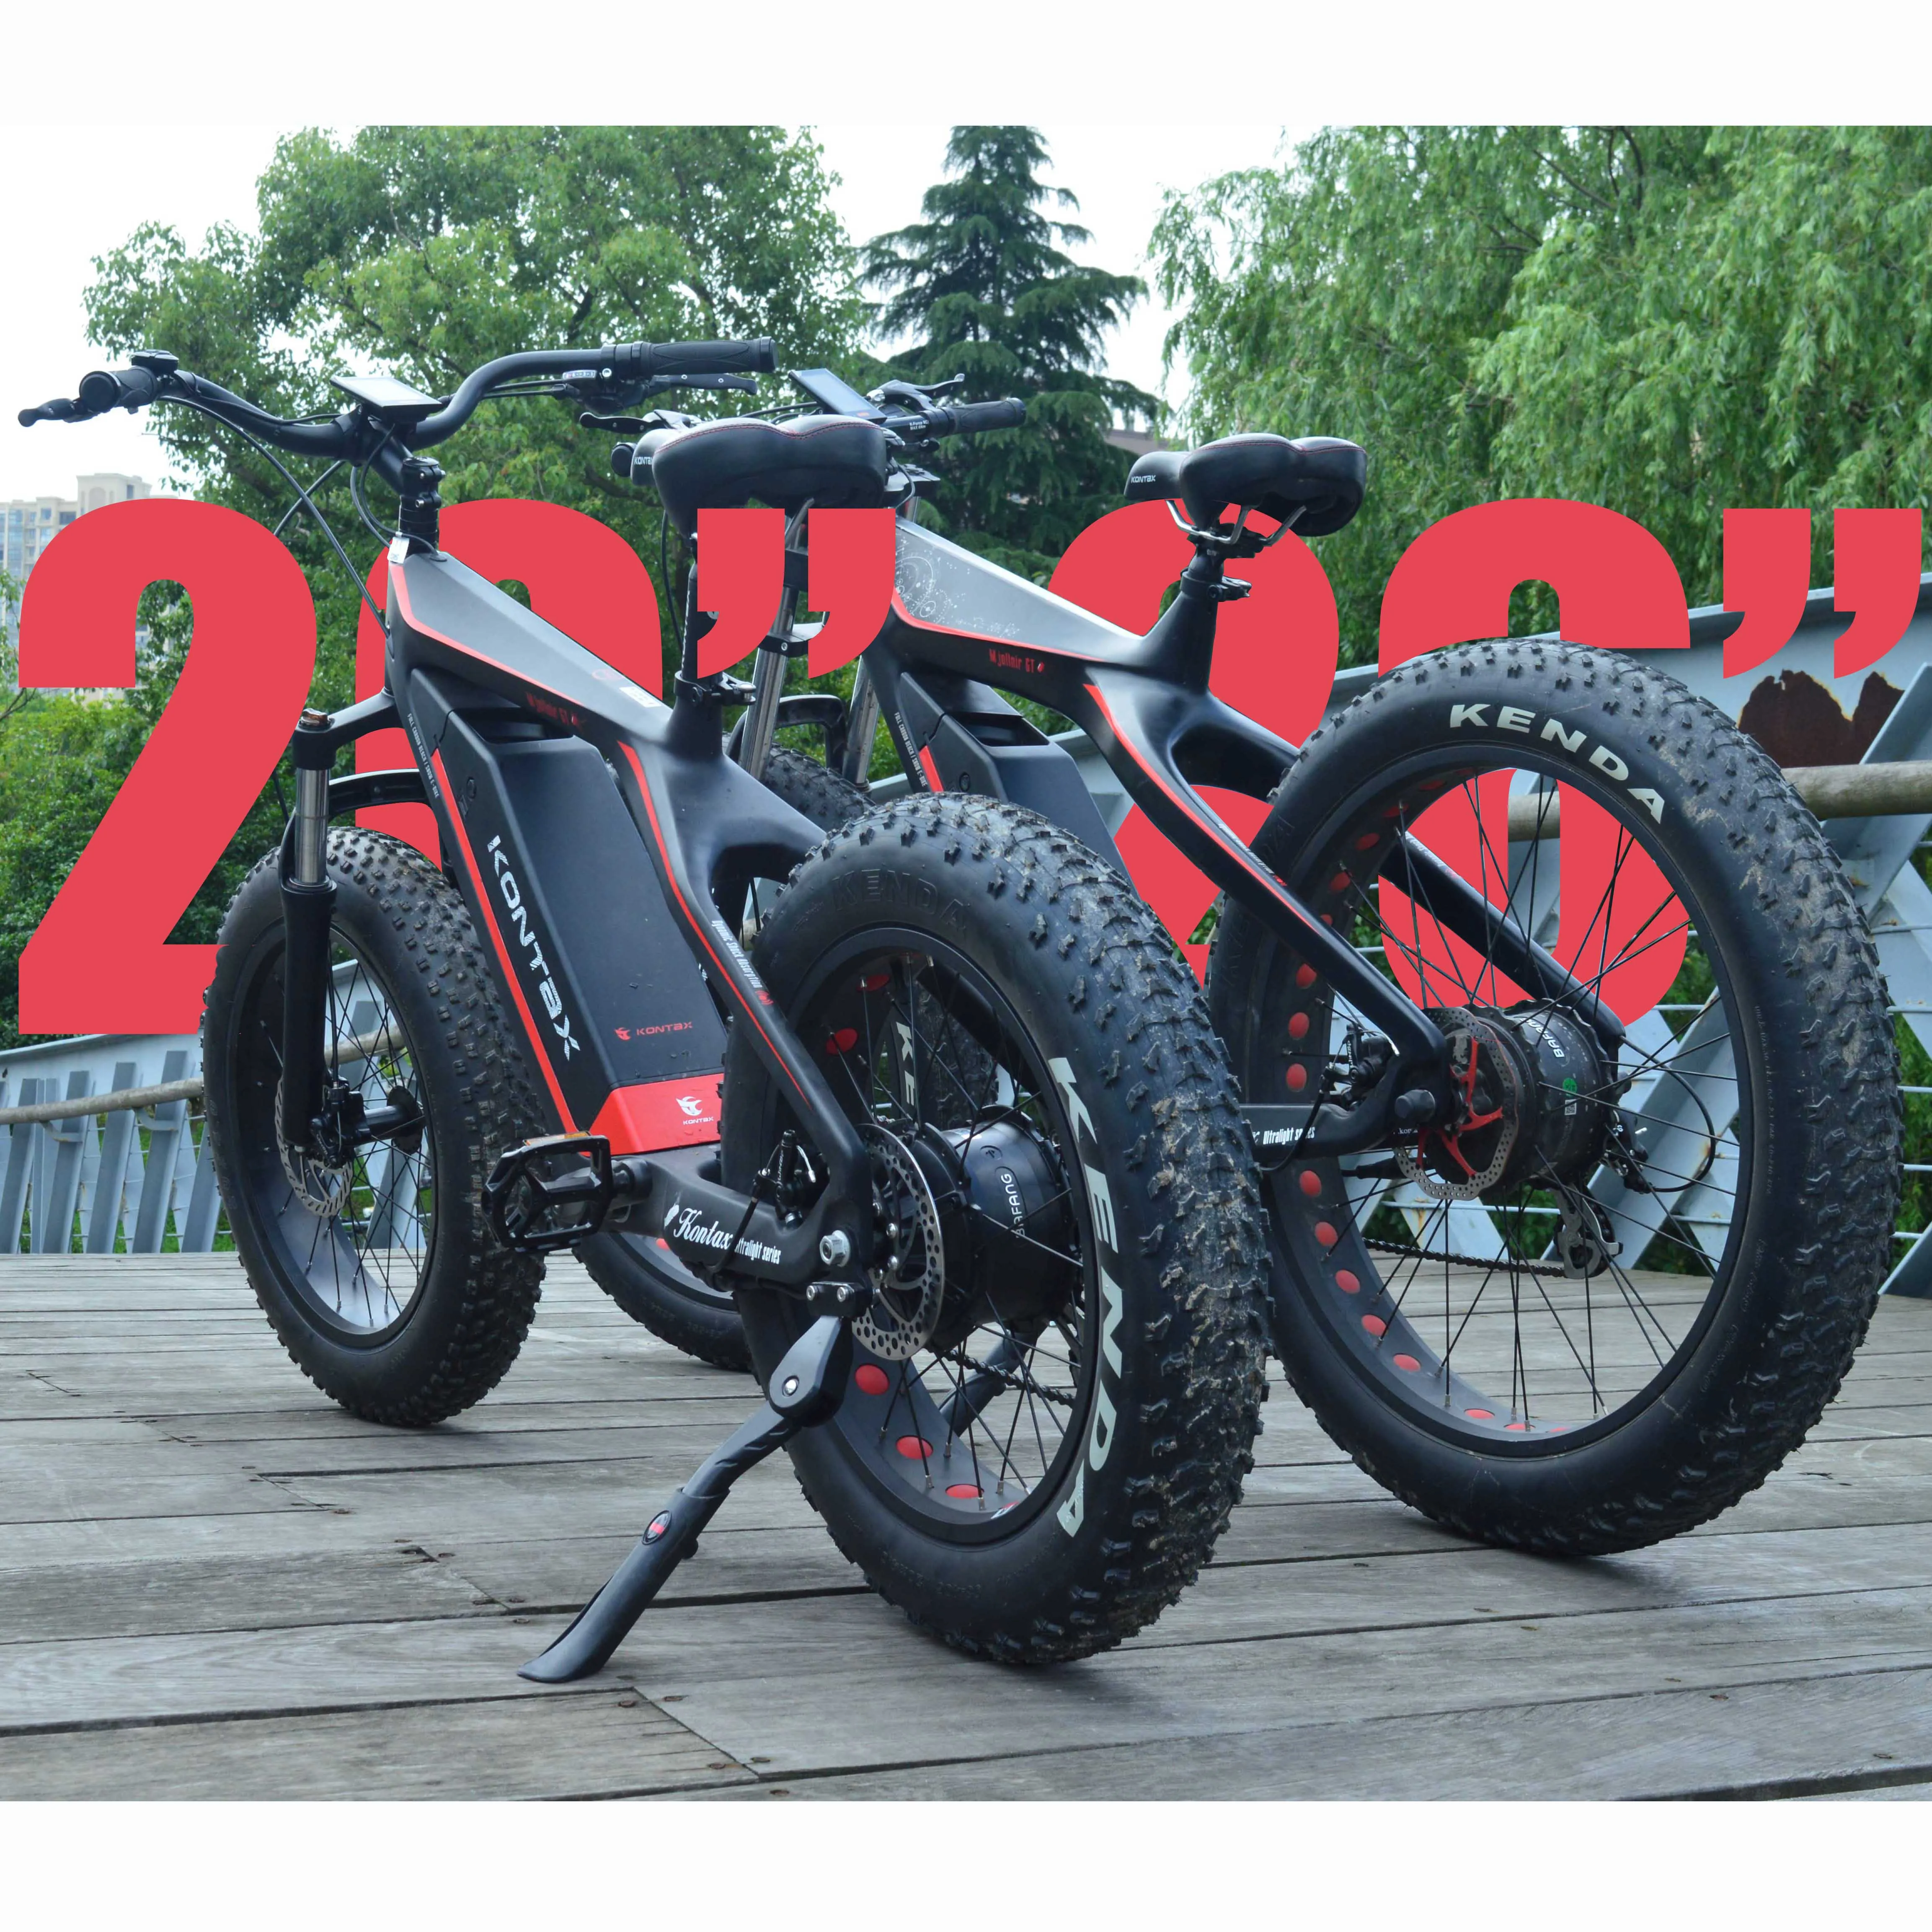 

48v1000W 20''x4.0 Snow Beach Bicycle Fat Tire Electric Bike with 48V13AH Lithium Battery for Adult, Customizable